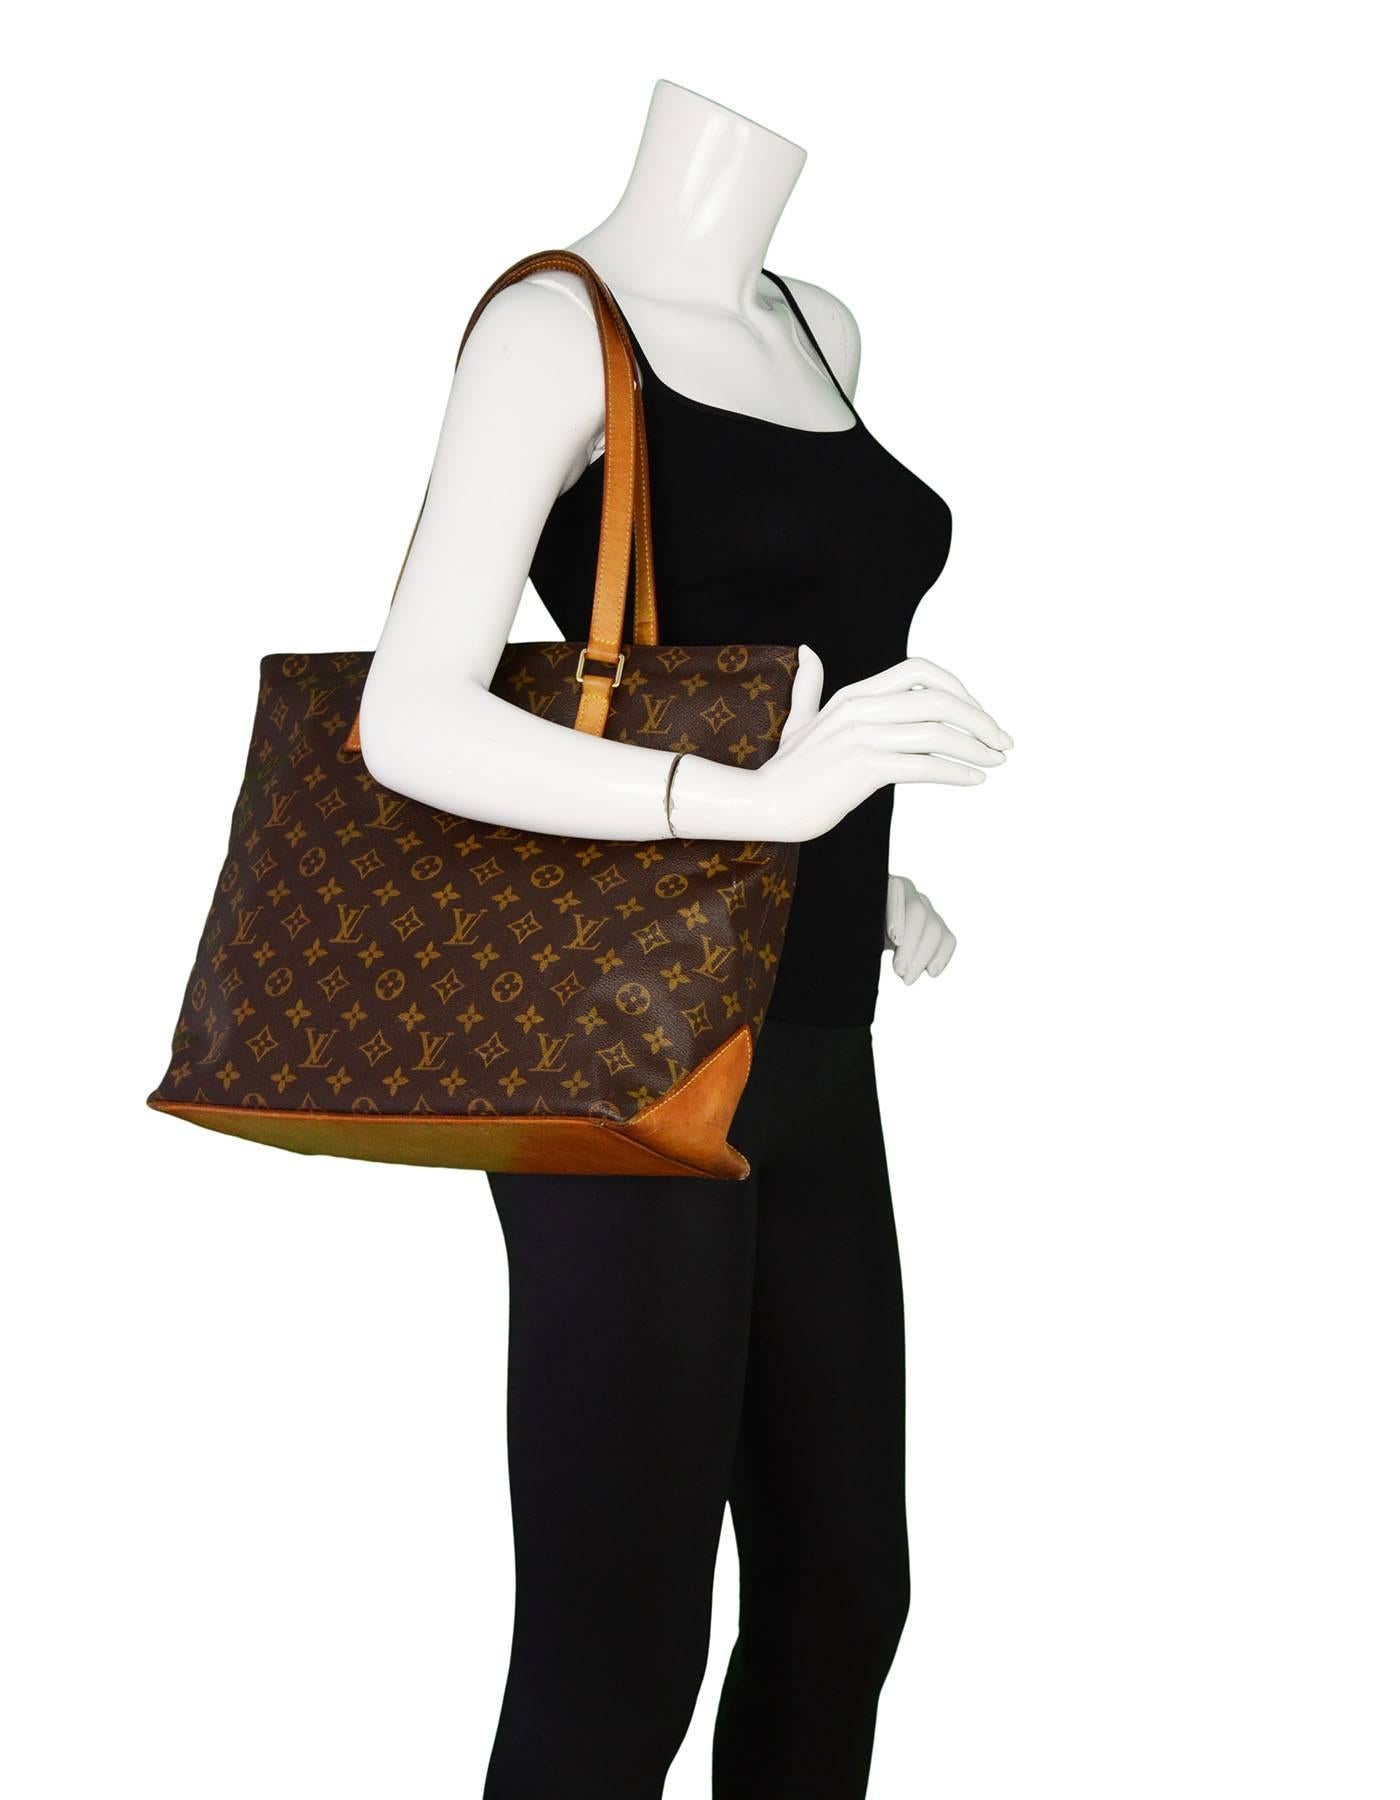 Louis Vuitton Monogram Cabas Alto Tote

Made In: France
Year of Production: 2006
Color: Brown
Materials: Coated canvas and vachetta leather
Lining: Brown textile
Hardware: Gold-tone
Closure: Zip top
Serial Number/Date Code: AR0036
Exterior